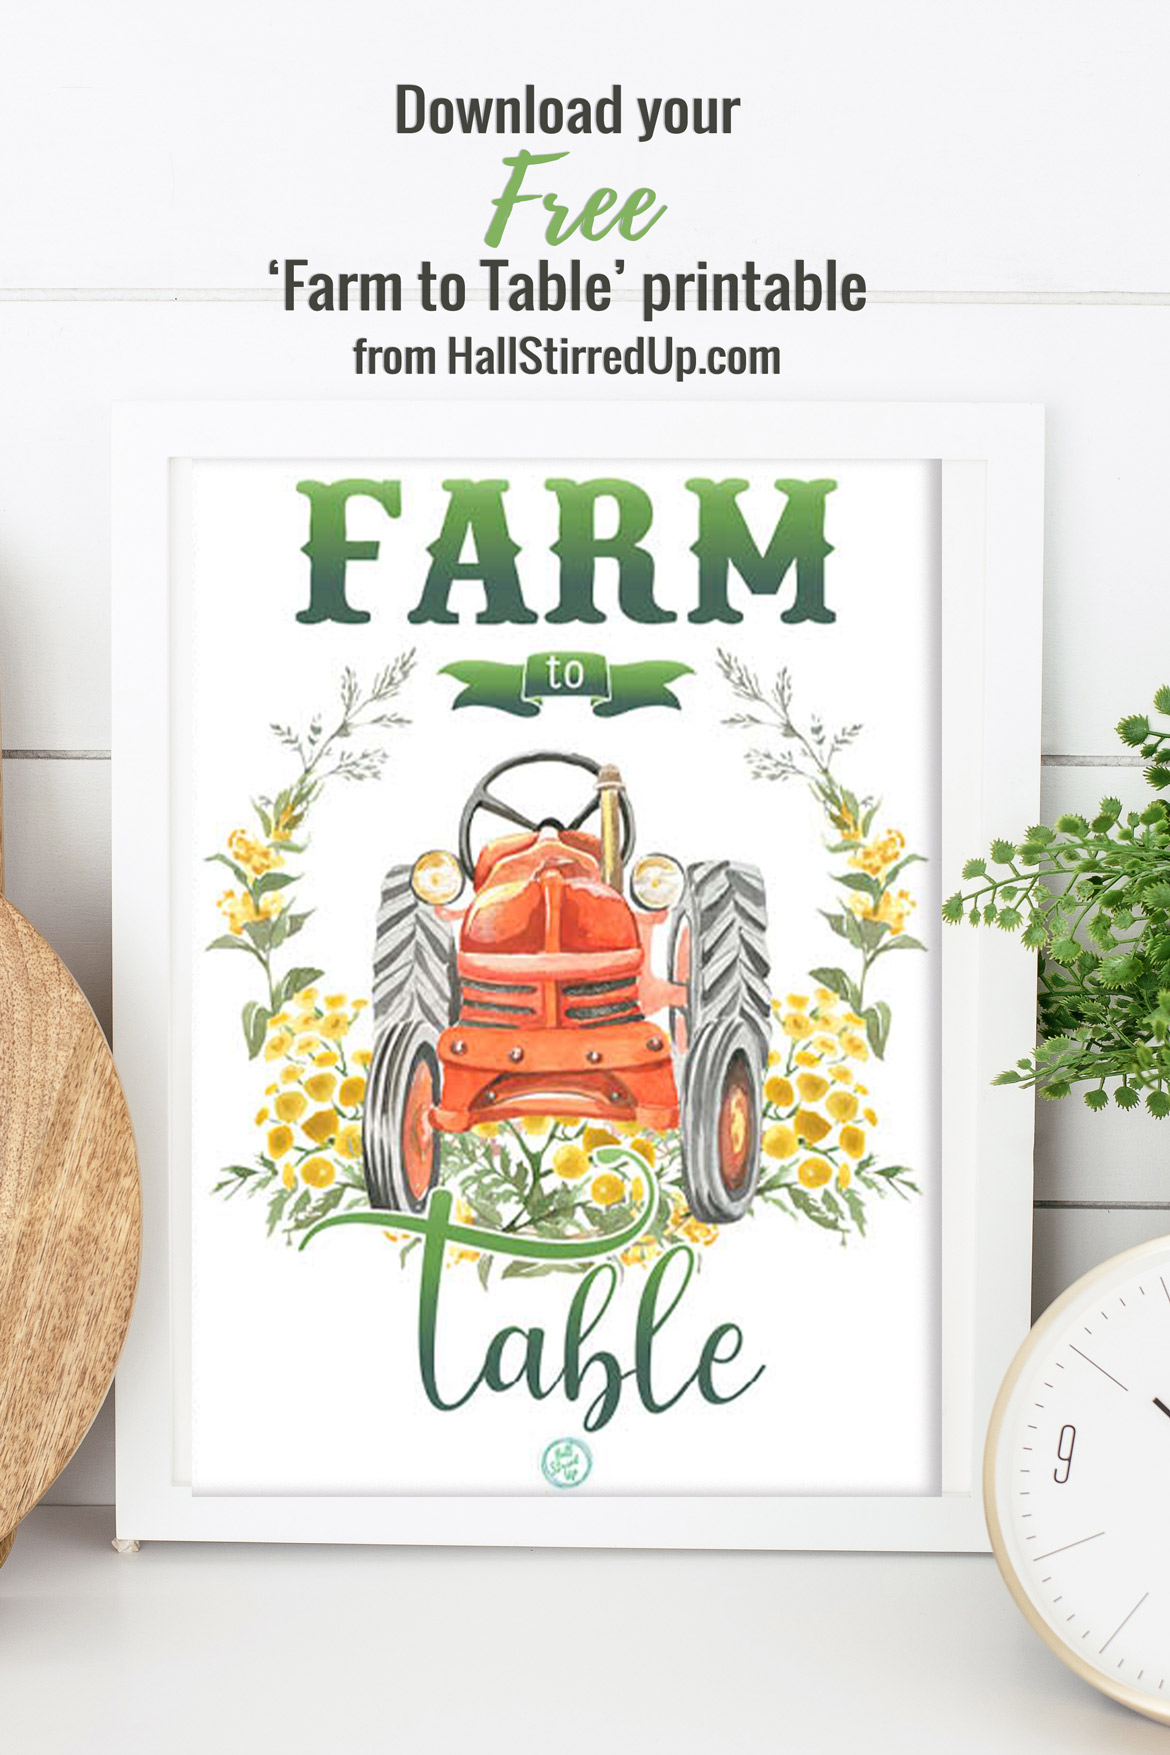 Join the Farm to Table movement Includes free printable